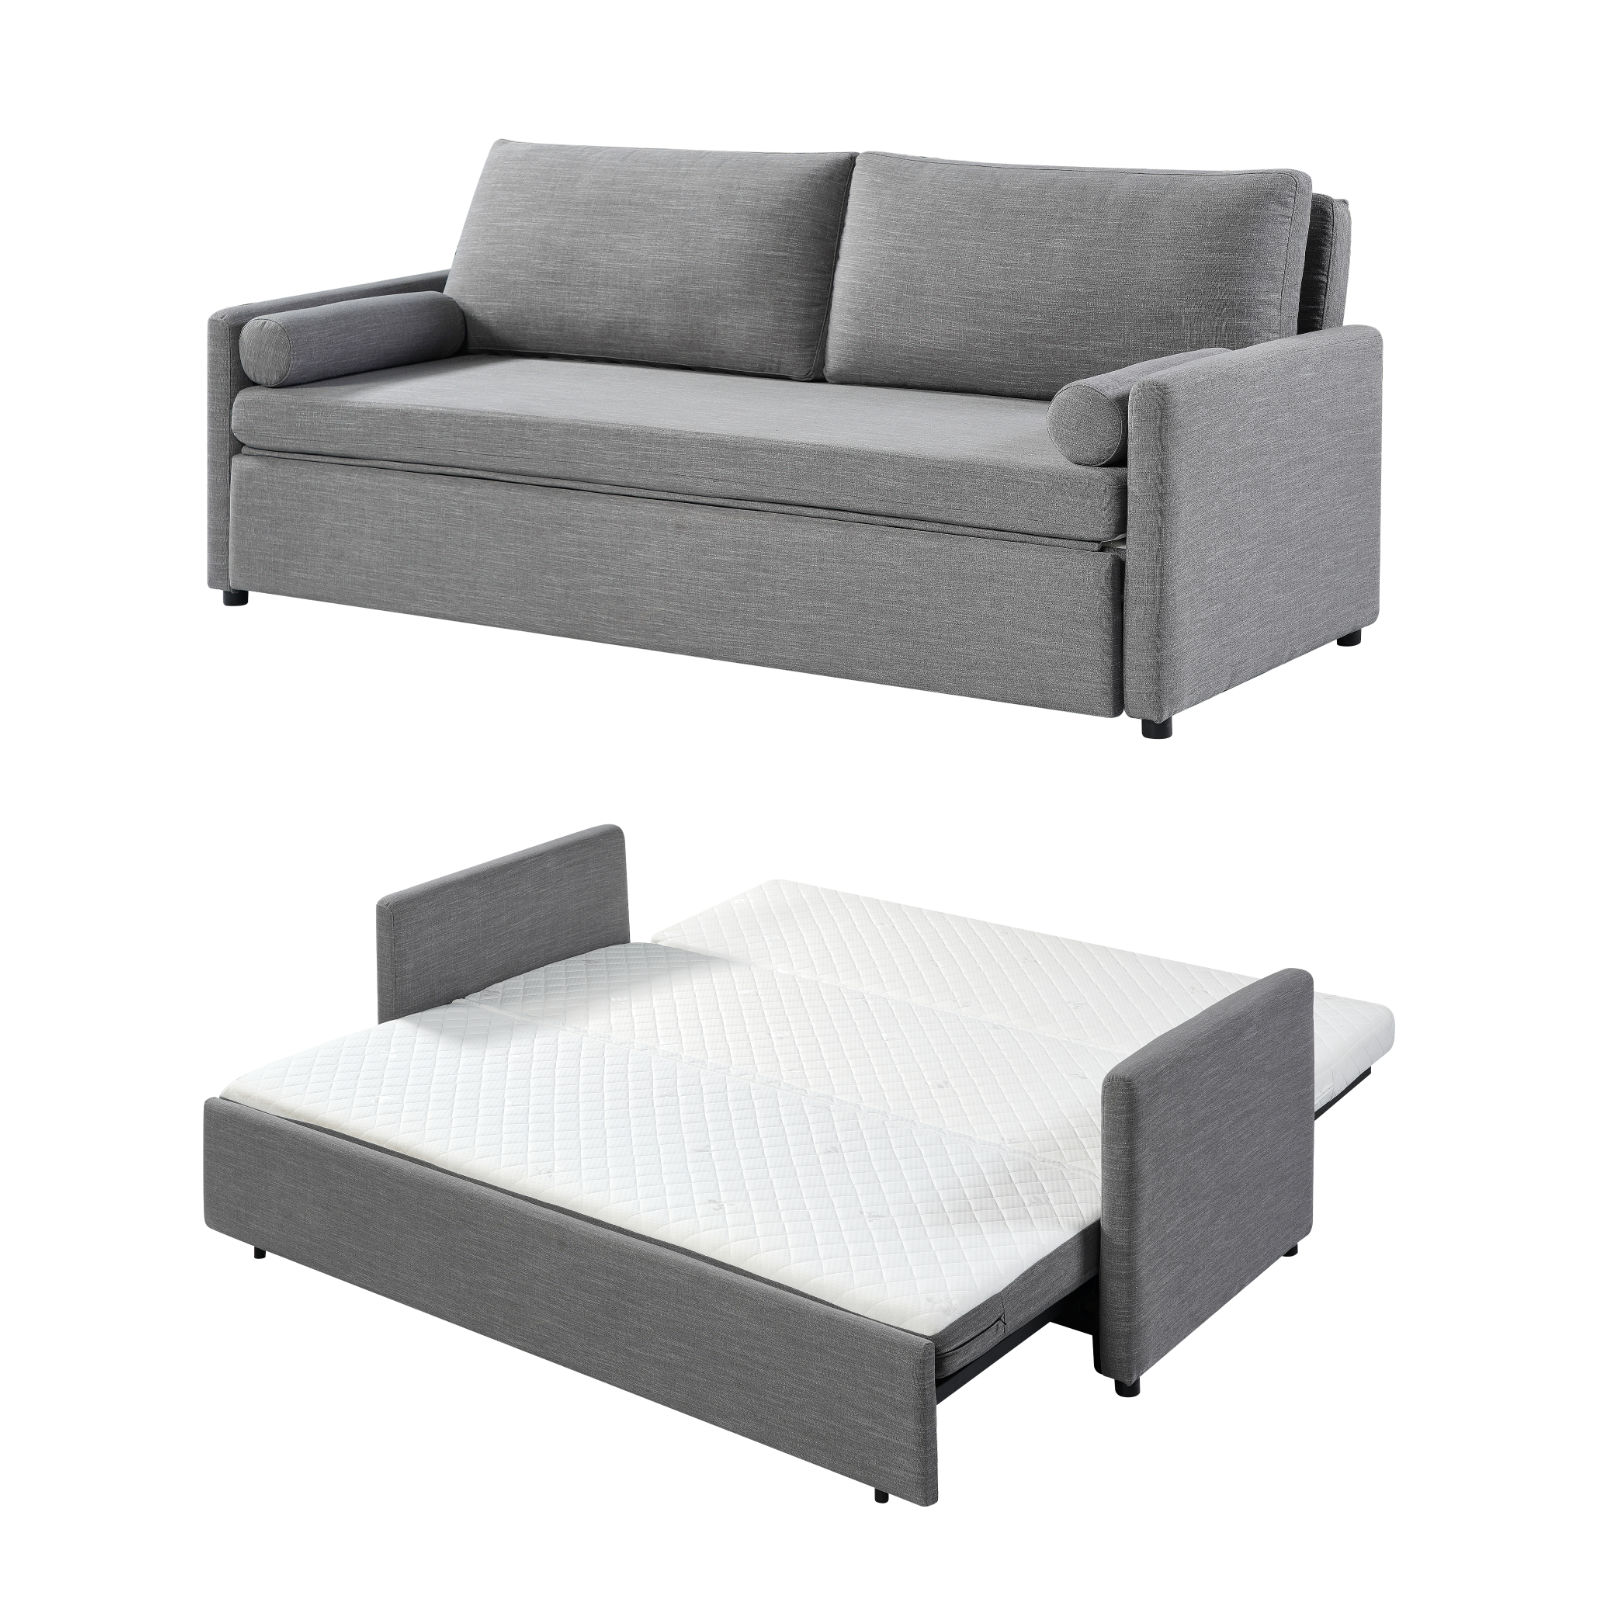 https://expandfurniture.com/wp-content/uploads/2021/06/Harmony-wide-King-size-sofa-bed-with-memory-foam-even-sleep-New-Iron-Grey-fabric-HR.jpg